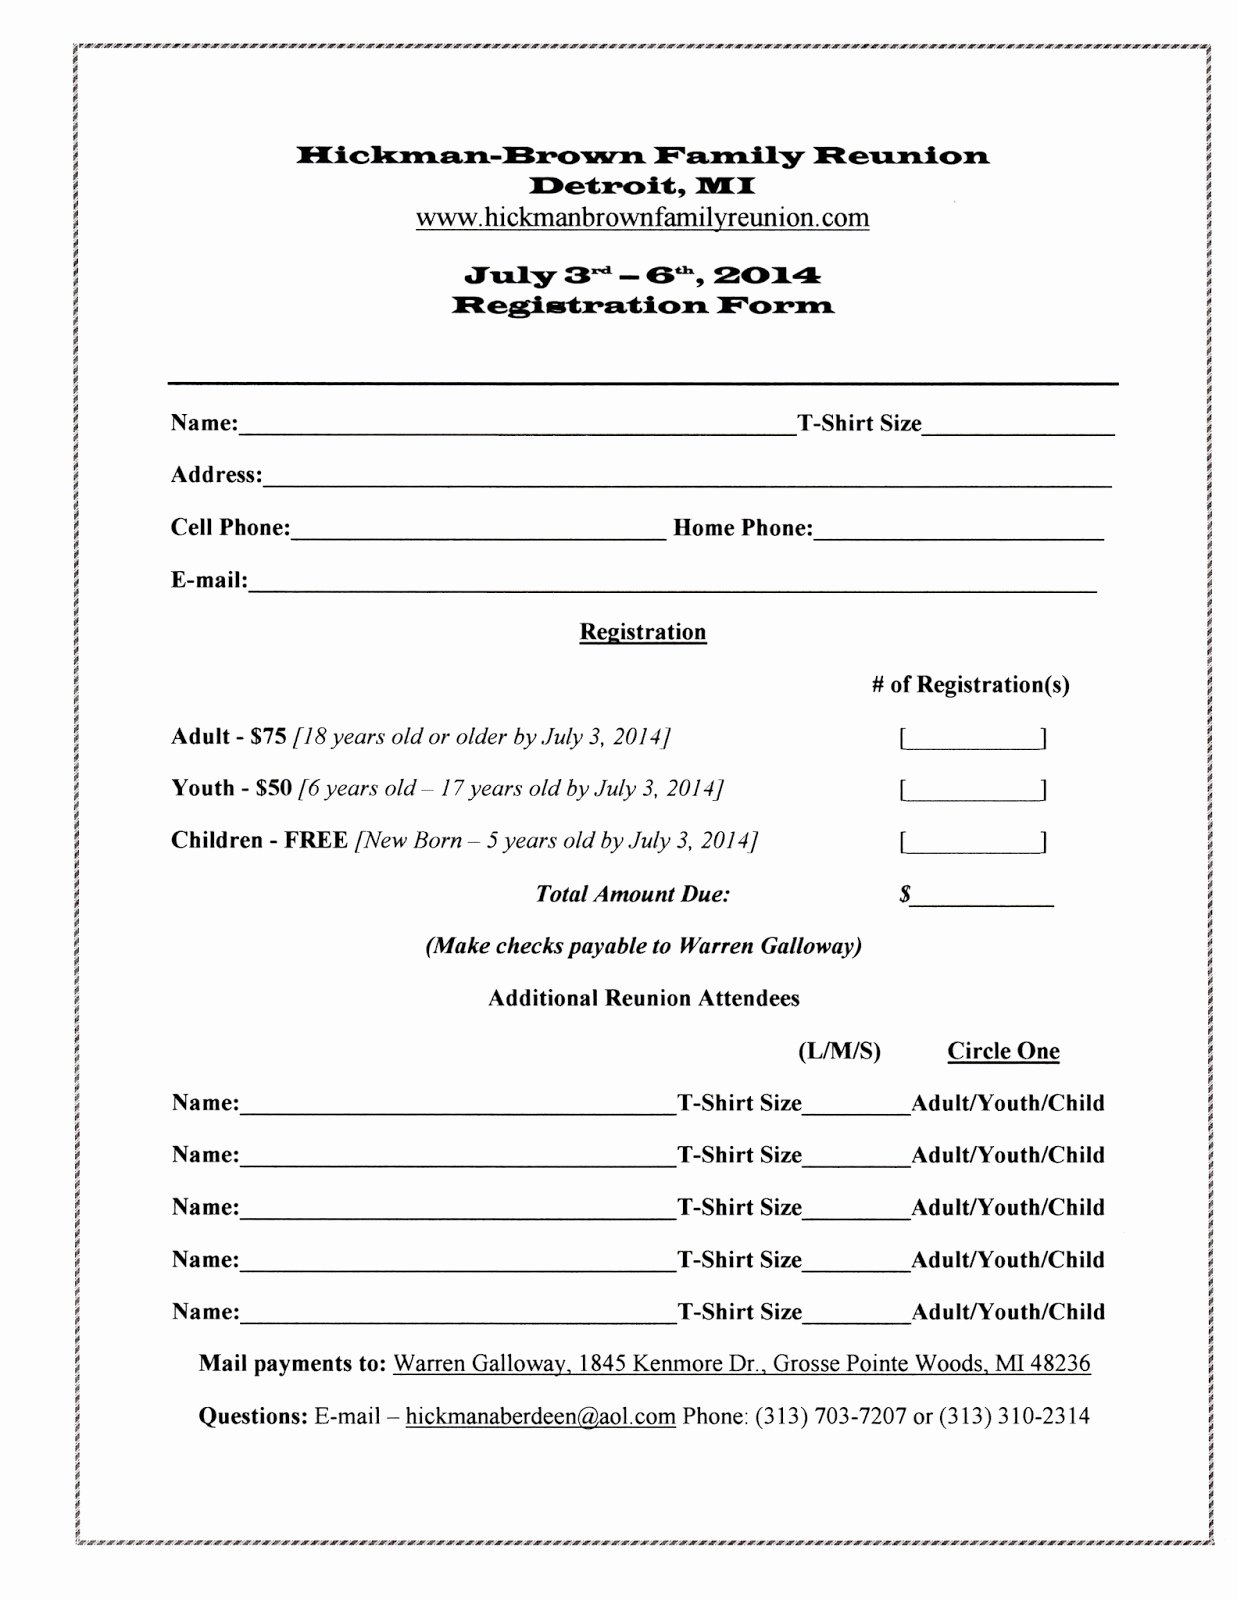 Blank Registration form Template Lovely Hickmanbrown Family Blog